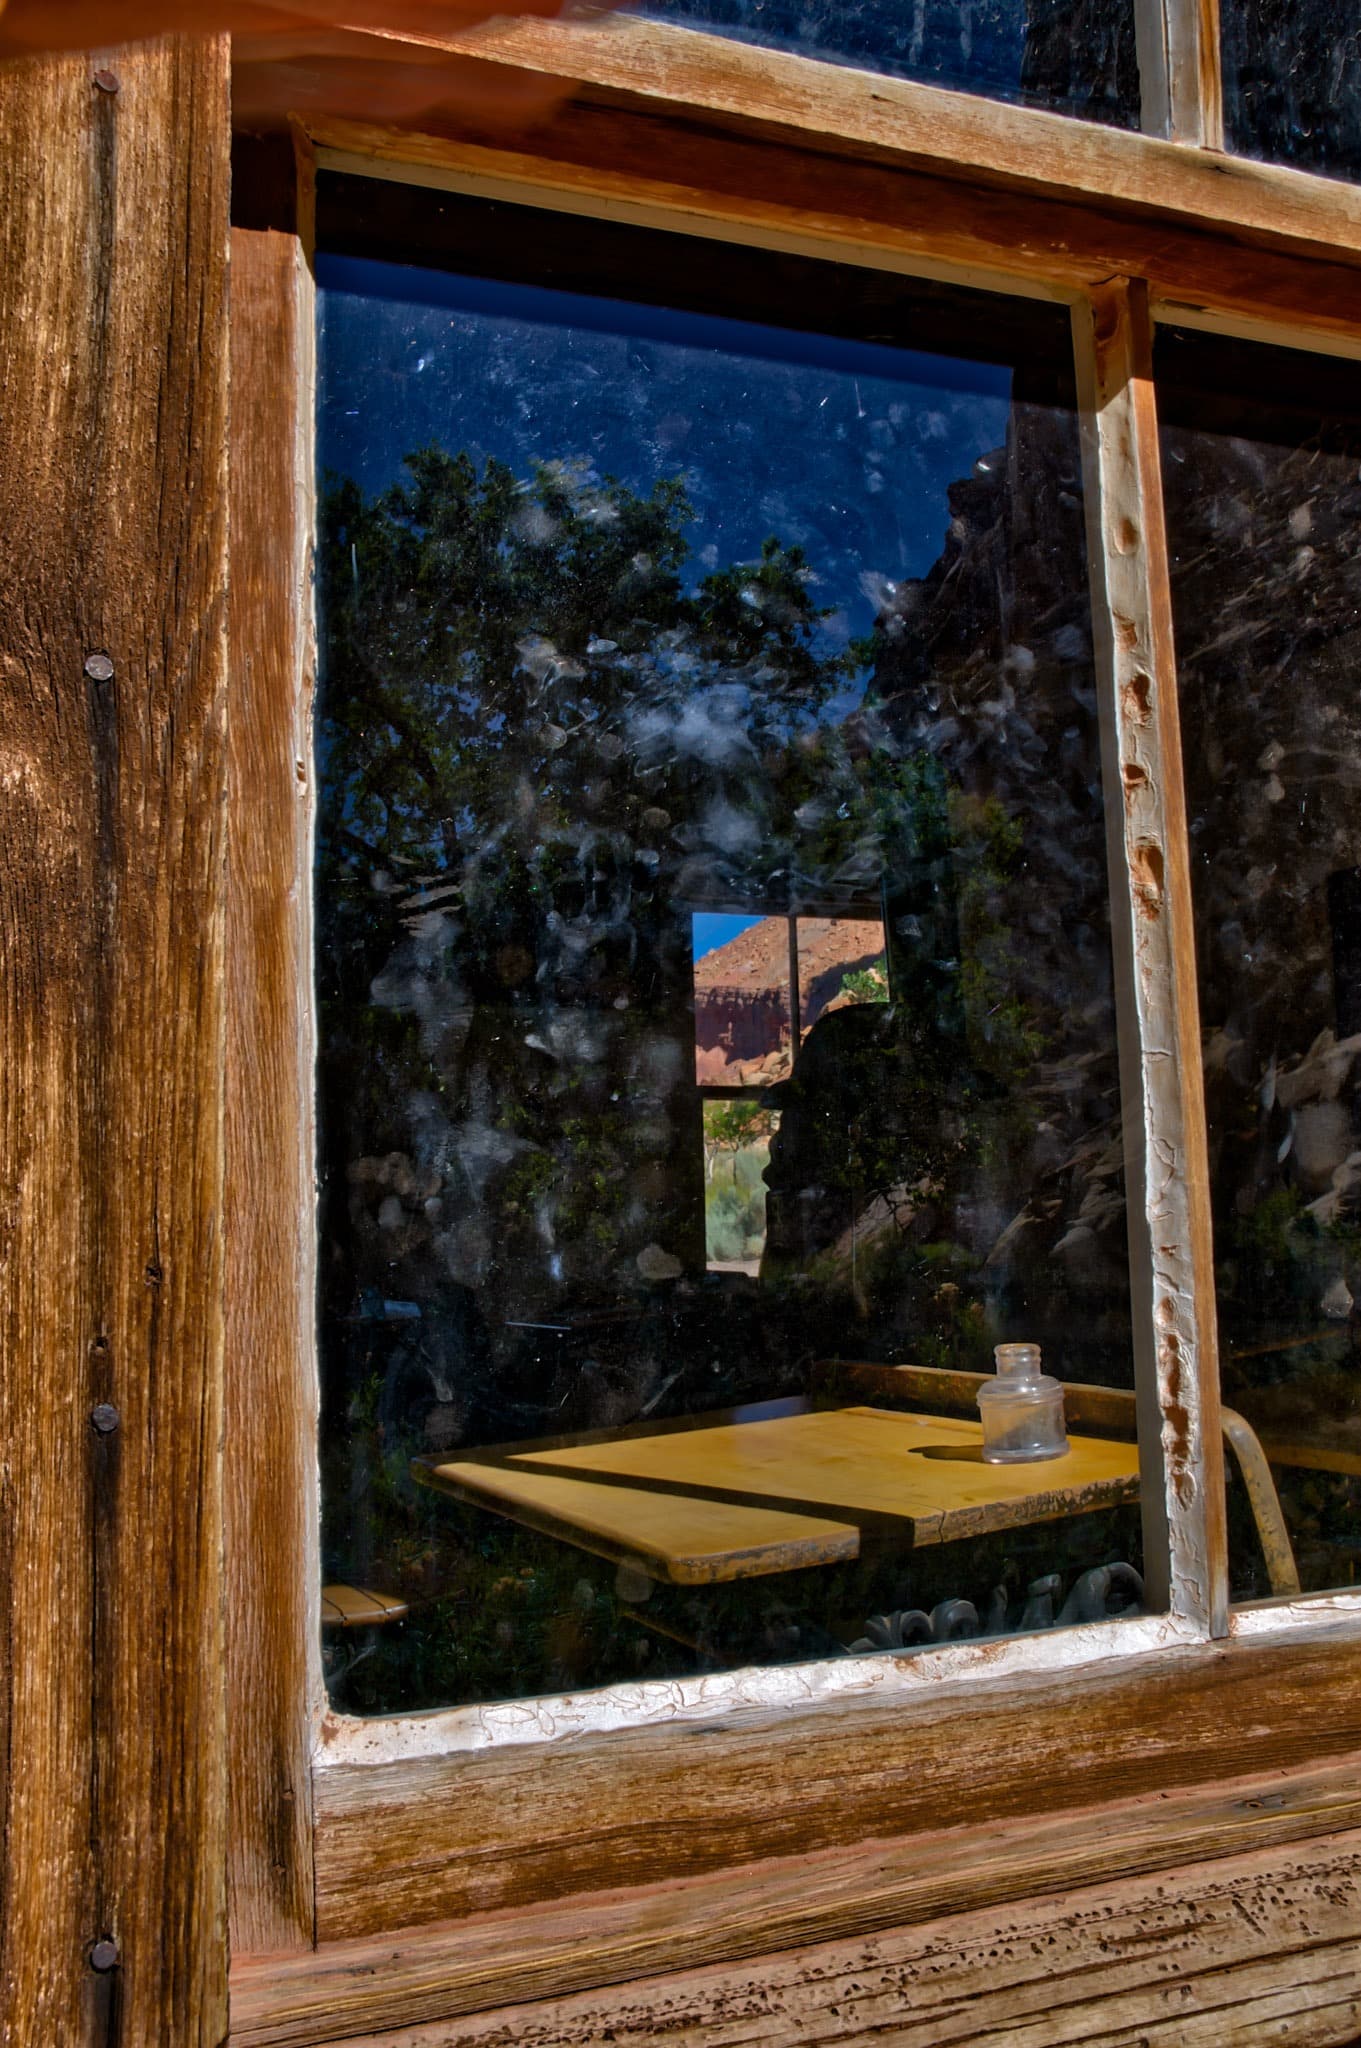 This is a closeup view of a student's desk through a window in the Fruita Schoolhouse, located in Capitol Reef National Park, Utah.